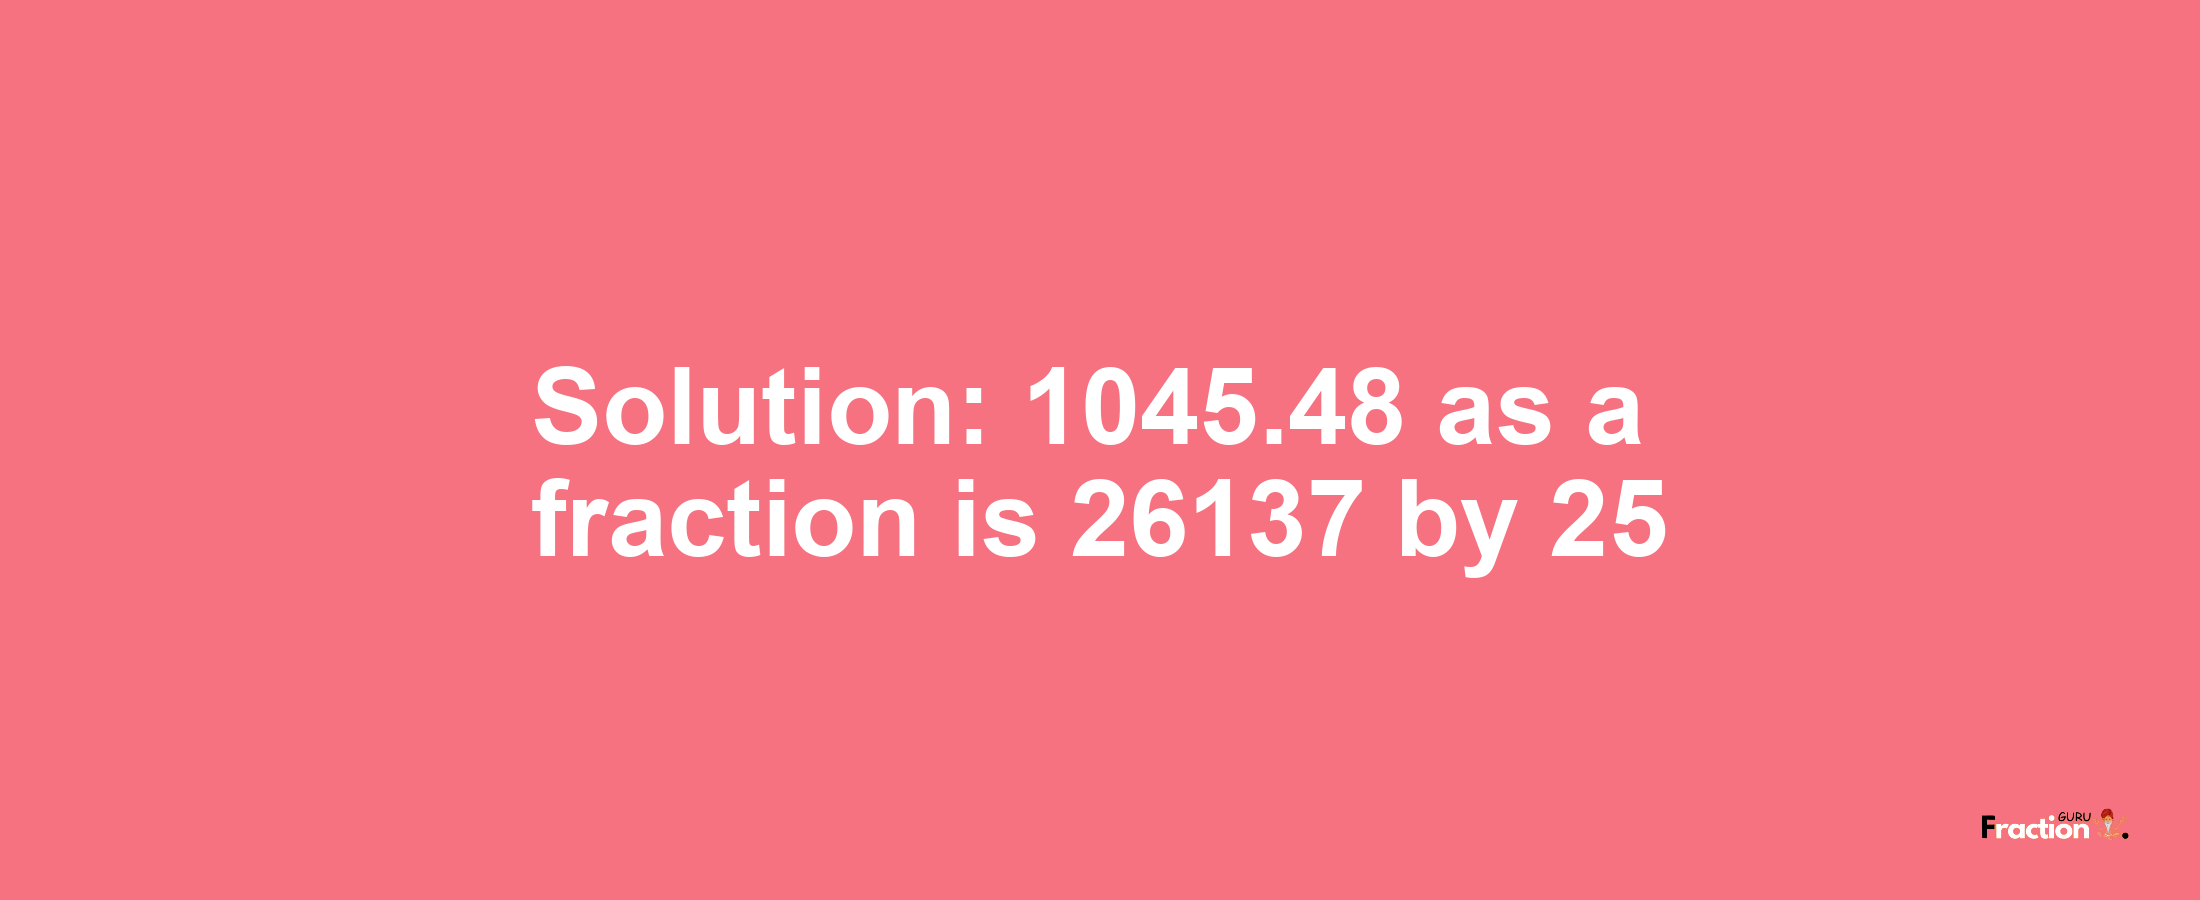 Solution:1045.48 as a fraction is 26137/25